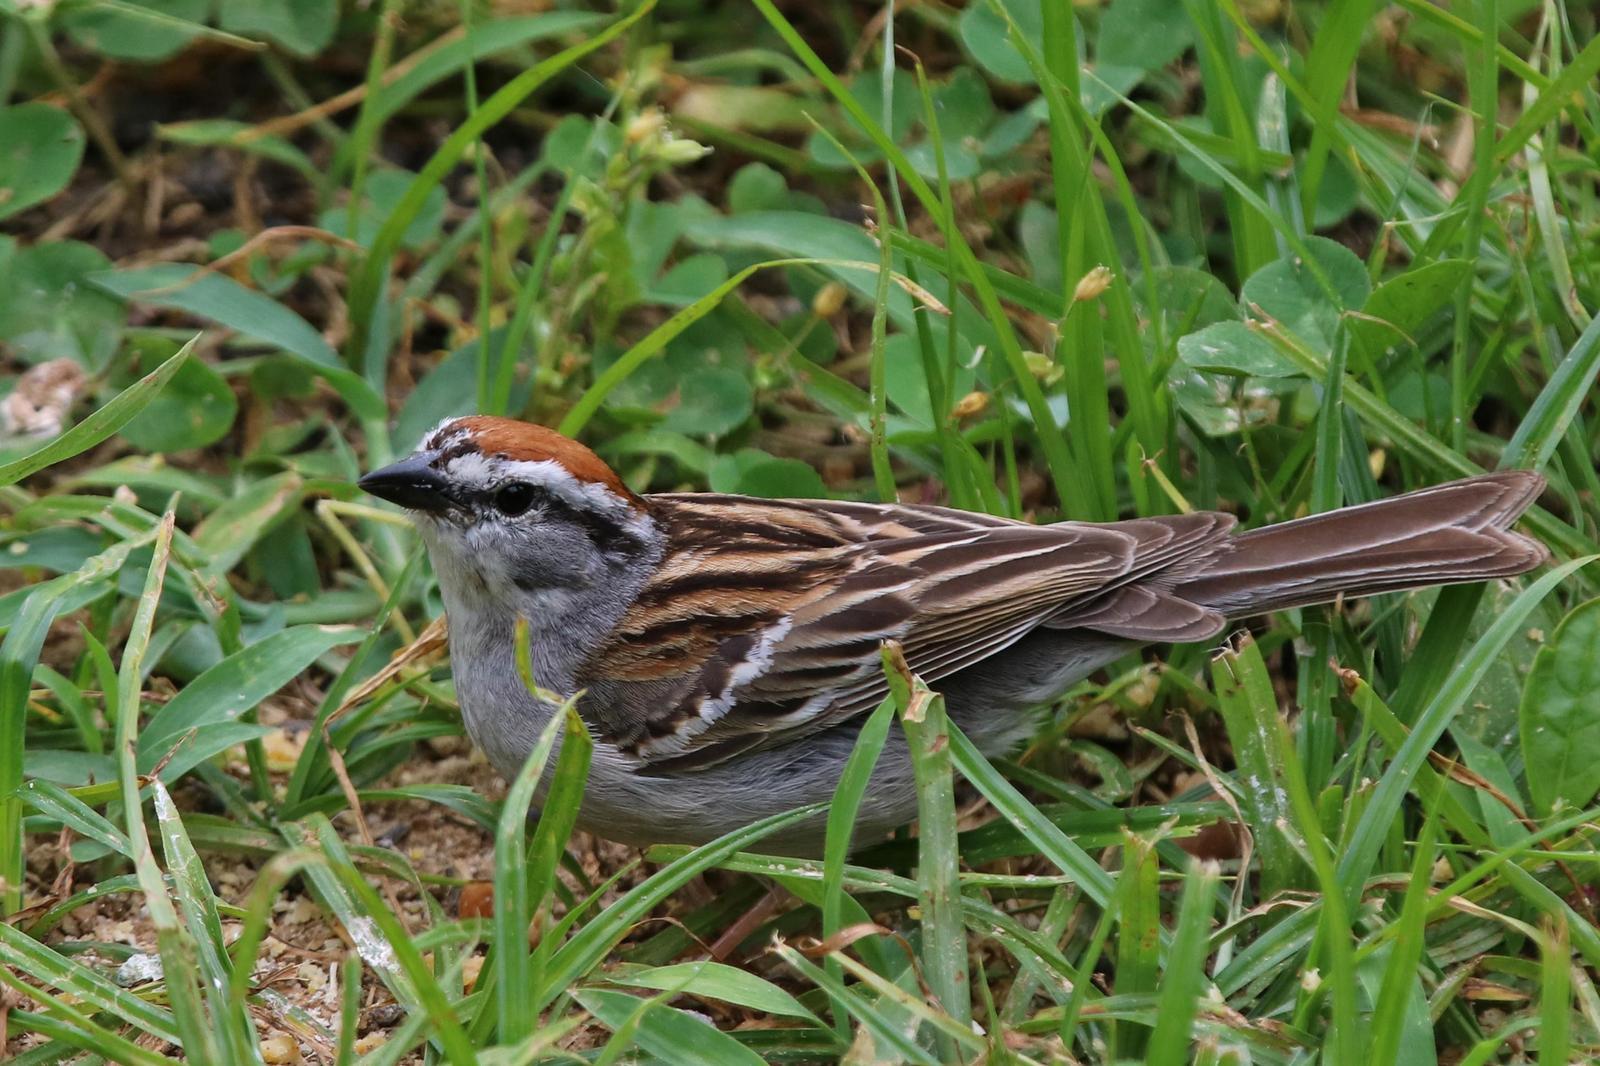 Chipping Sparrow Photo by Kristy Baker